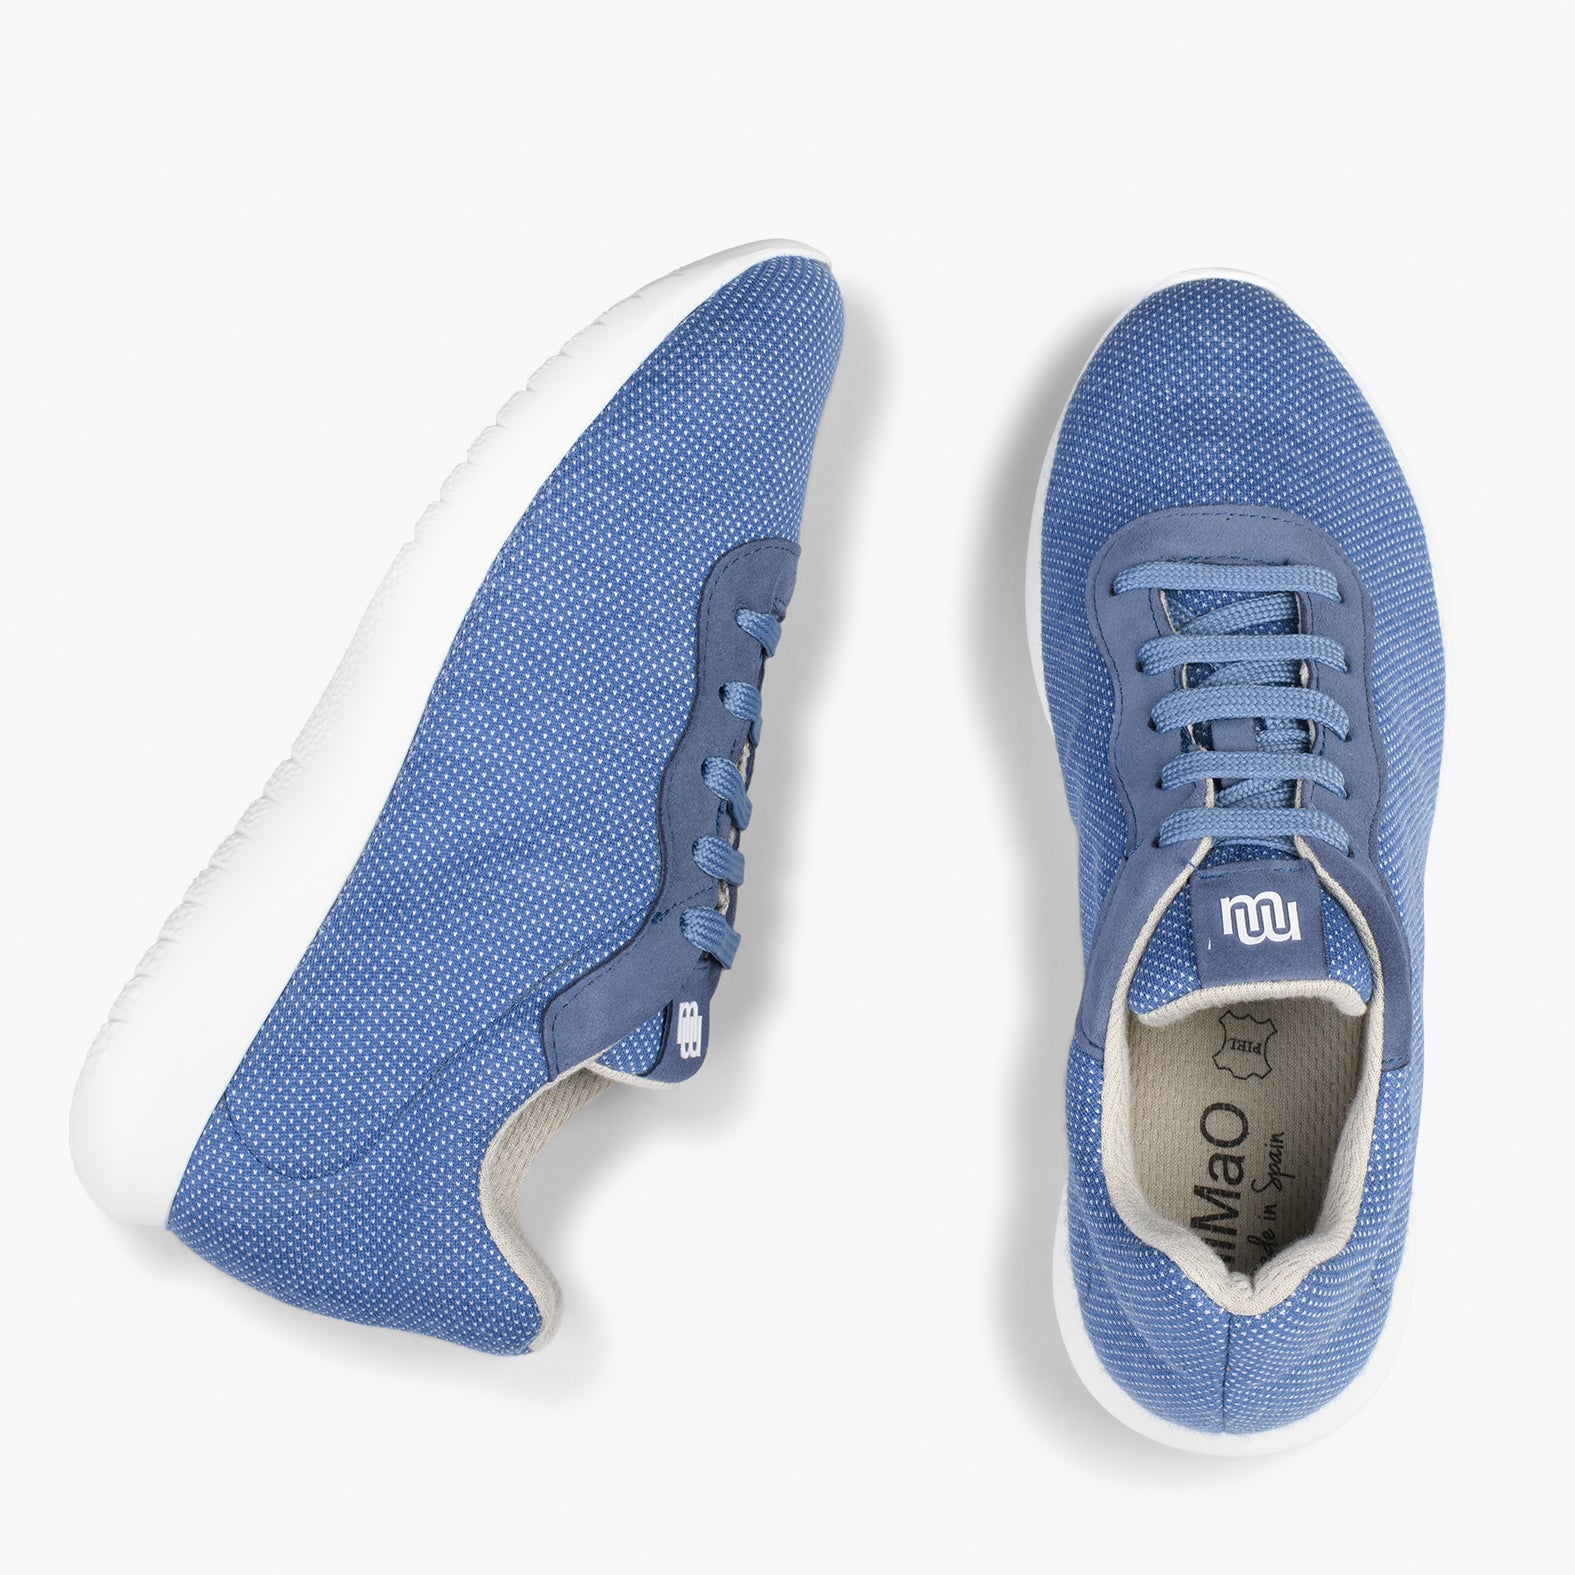 YOGA – JEANS sneakers crafted in merino wool